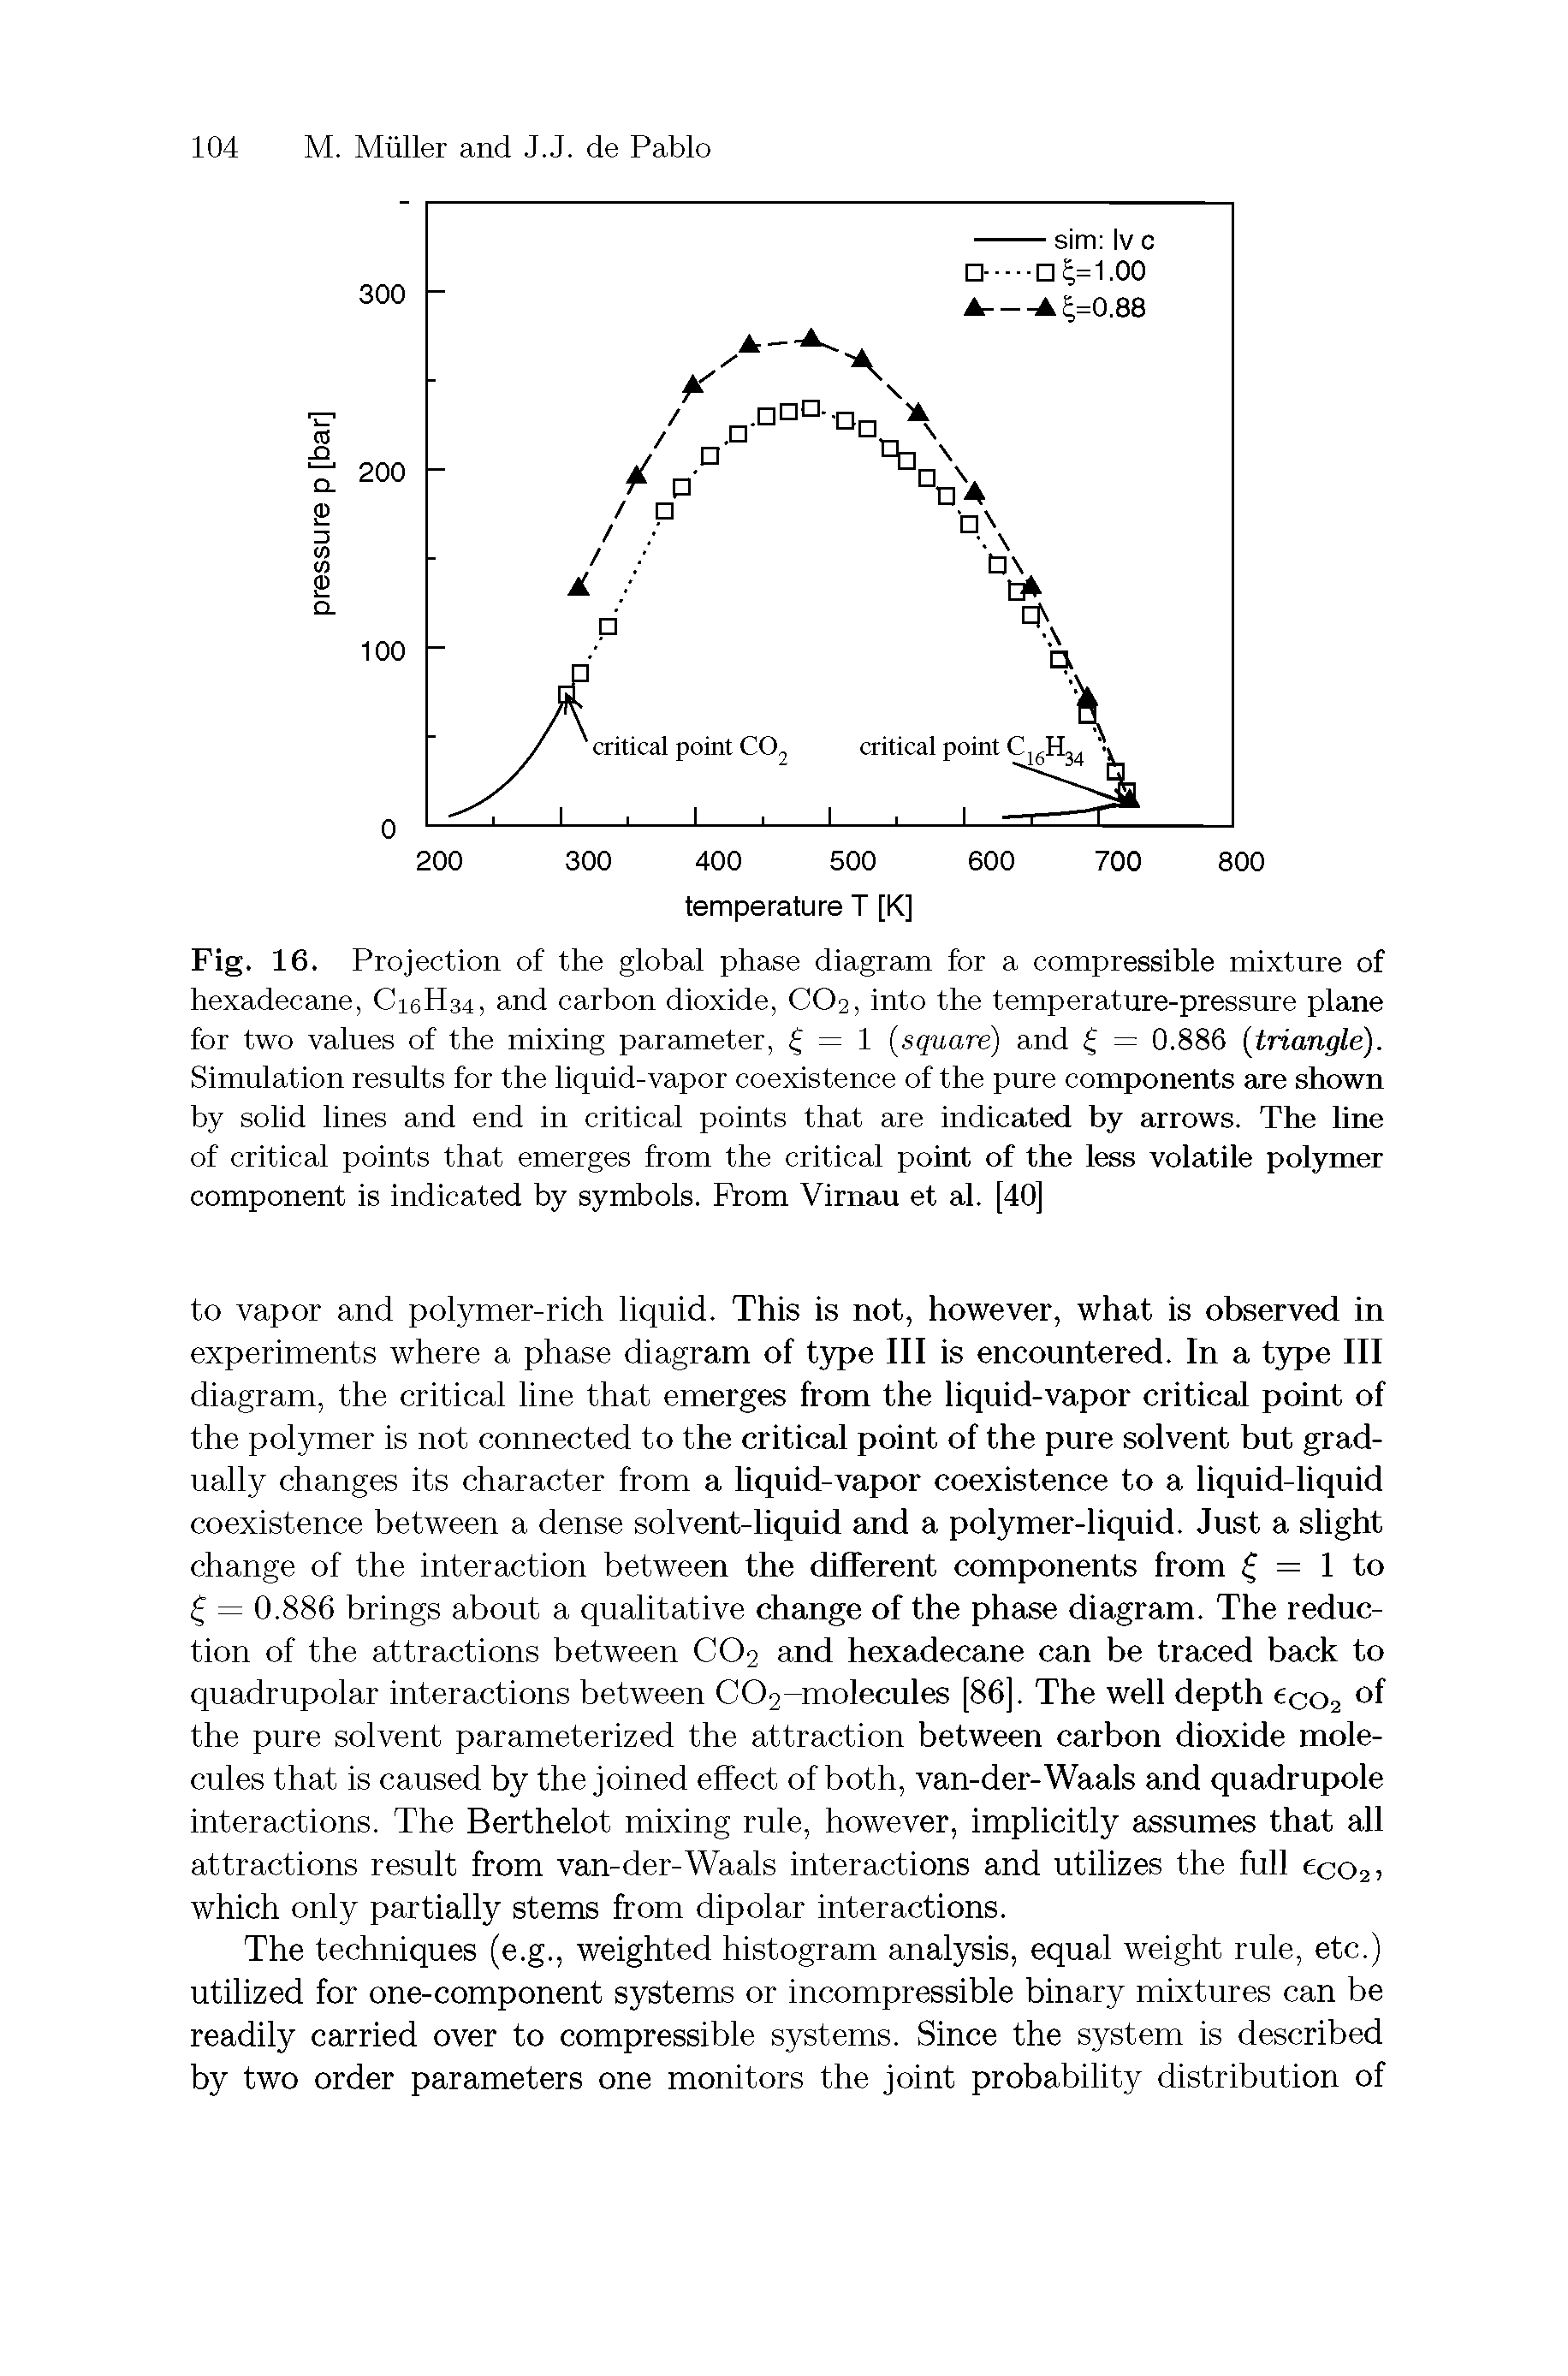 Fig. 16. Projection of the global phase diagram for a compressible mixture of hexadecane, C16H34, and carbon dioxide, CO2, into the temperature-pressure plane for two values of the mixing parameter, = 1 square) and = 0.886 triangle). Simulation results for the liquid-vapor coexistence of the pure components are shown by solid lines and end in critical points that are indicated by arrows. The line of critical points that emerges from the critical point of the less volatile polymer component is indicated by symbols. Prom Virnau et al. [40]...